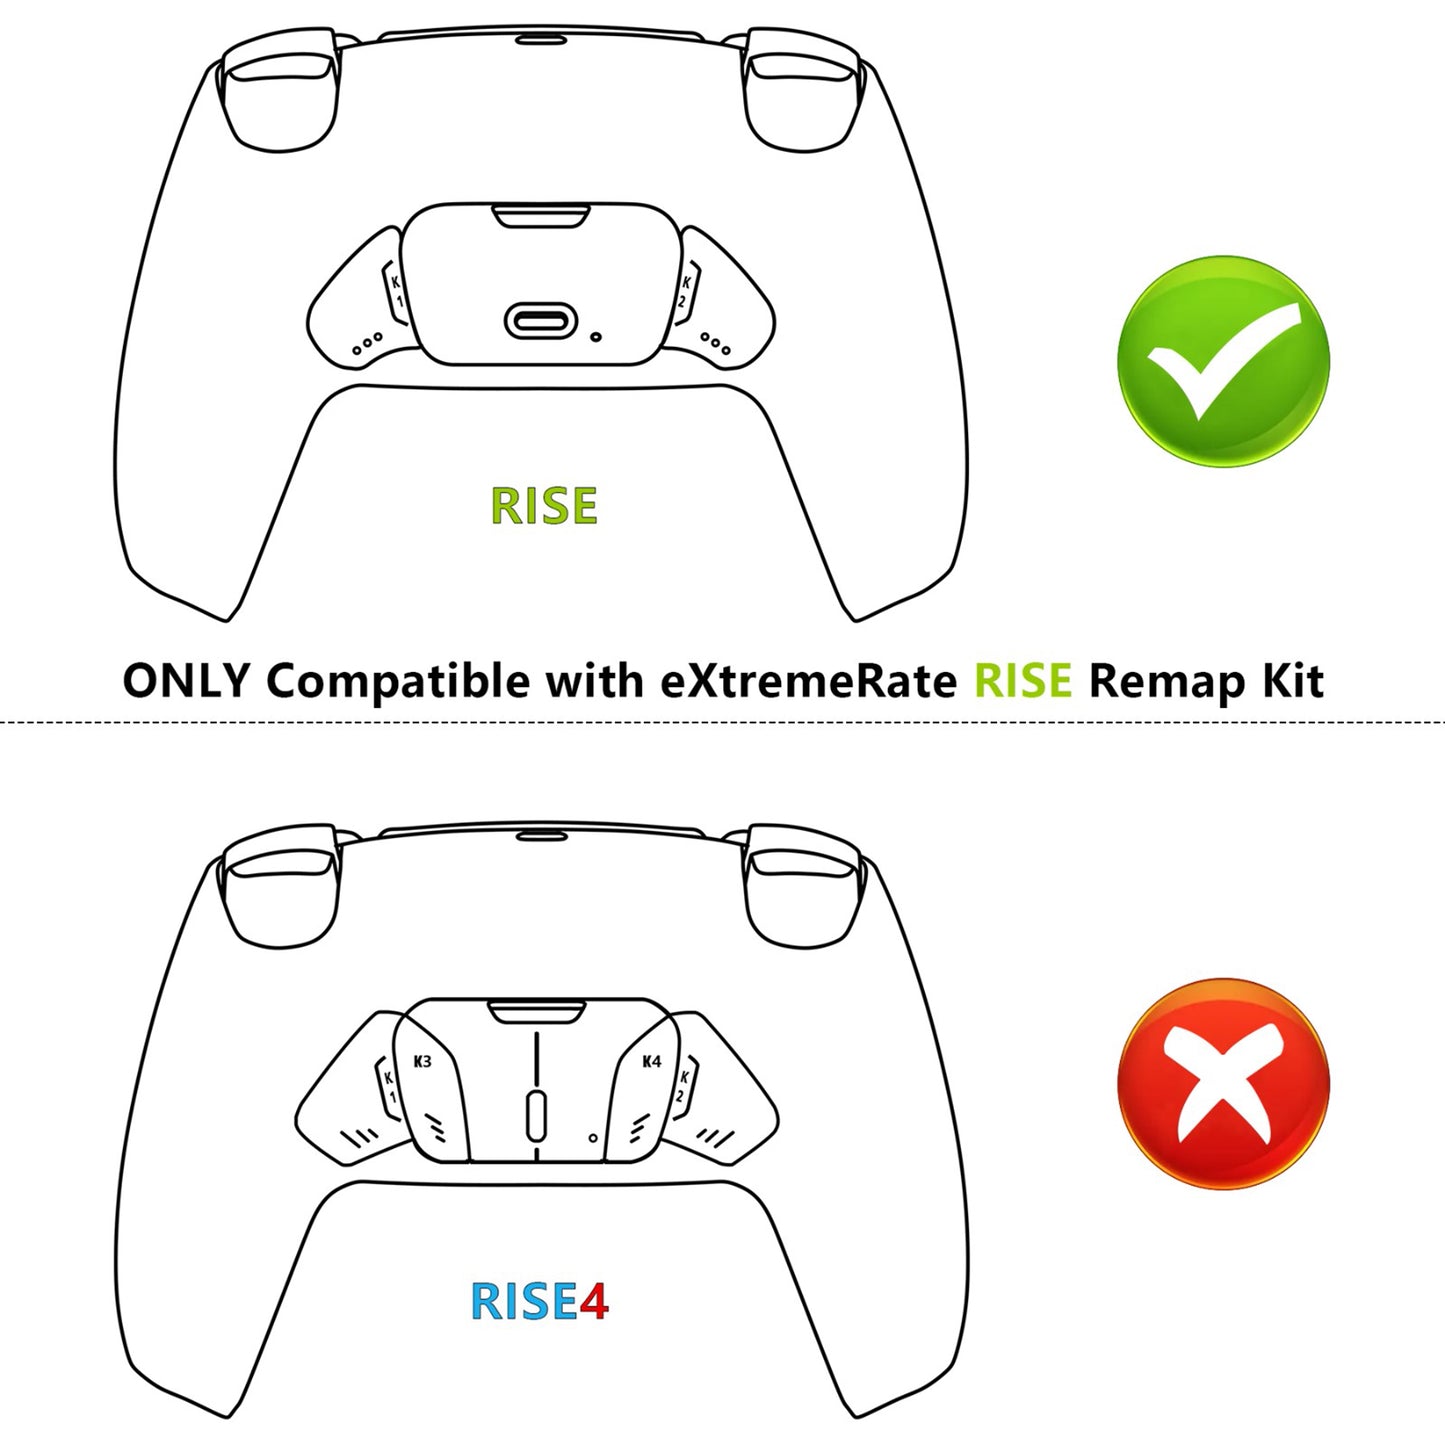 eXtremeRate Replacement Redesigned K1 K2 Back Buttons for eXtremerate RISE Remap Kit, Compatible with PS5 Controller - Chrome Red eXtremeRate